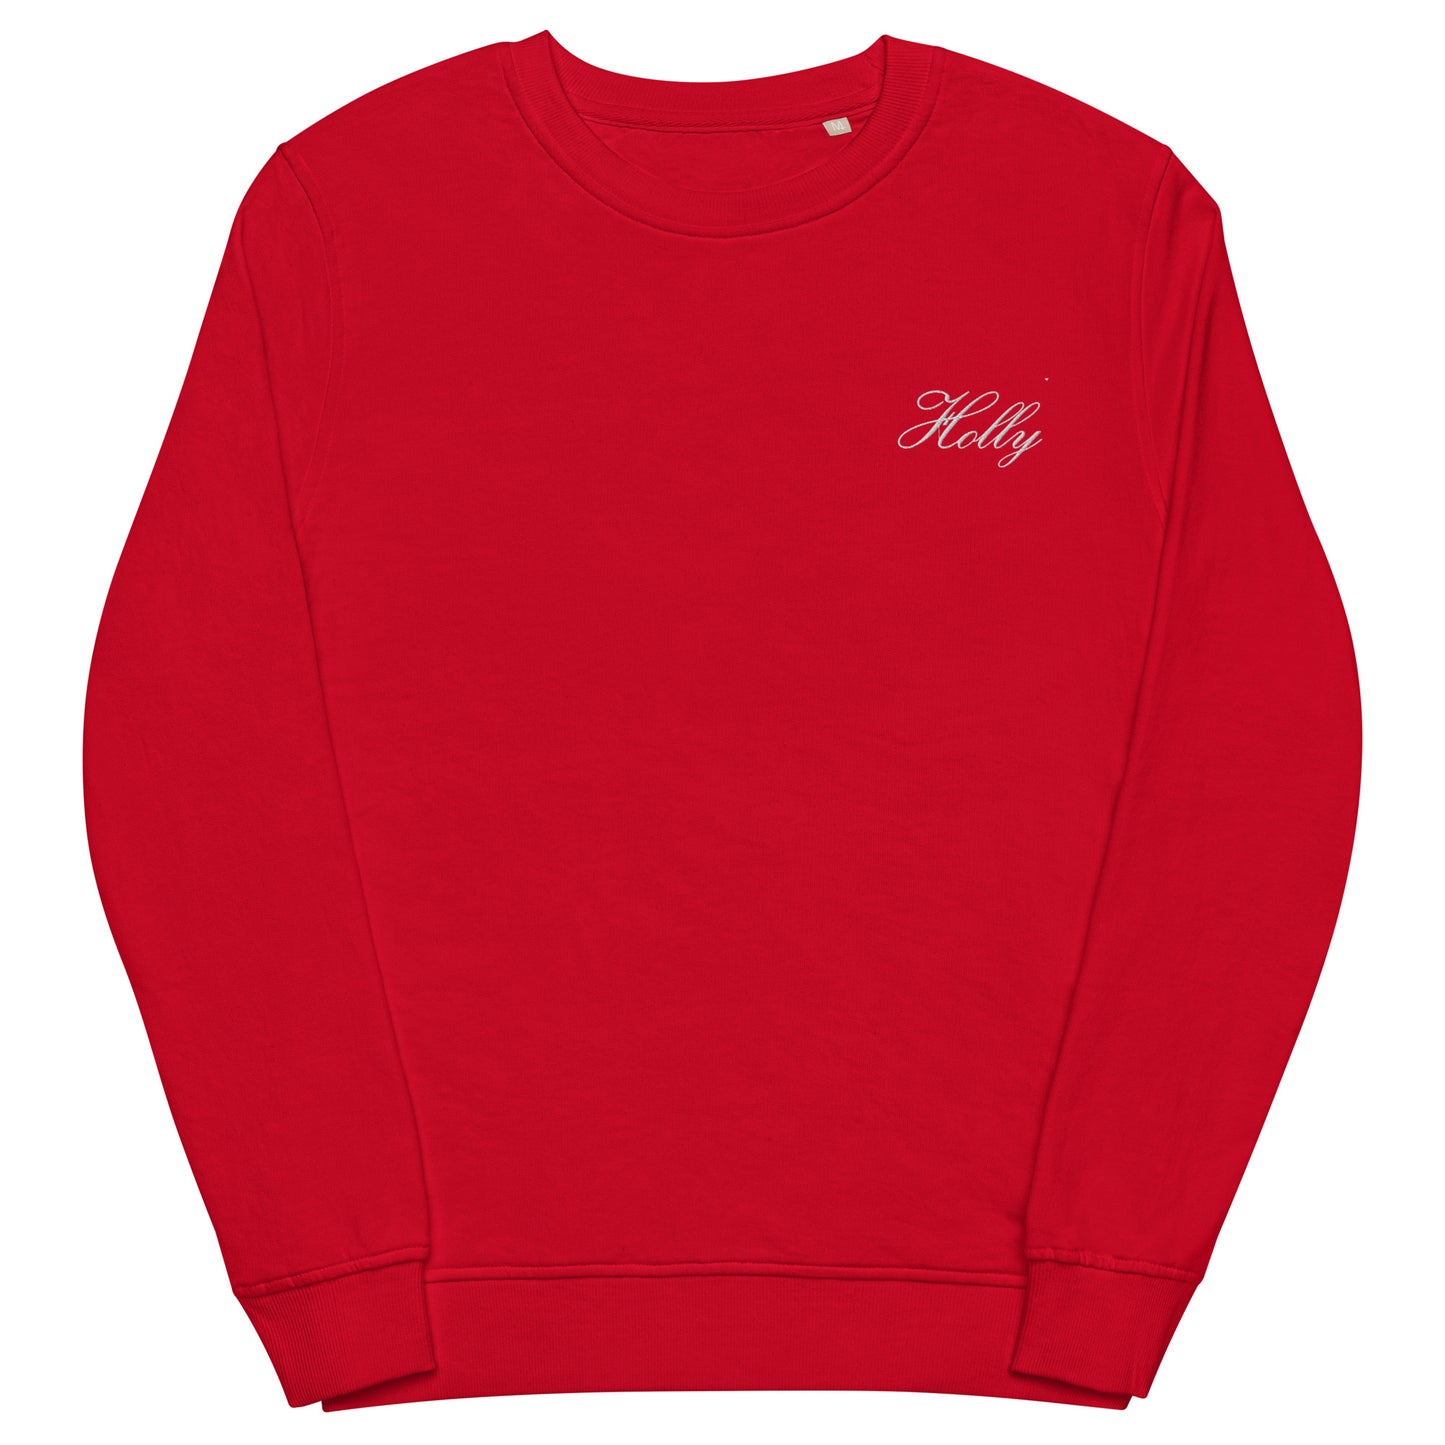 Holly Embroidered Eco-Friendly Sweatshirt